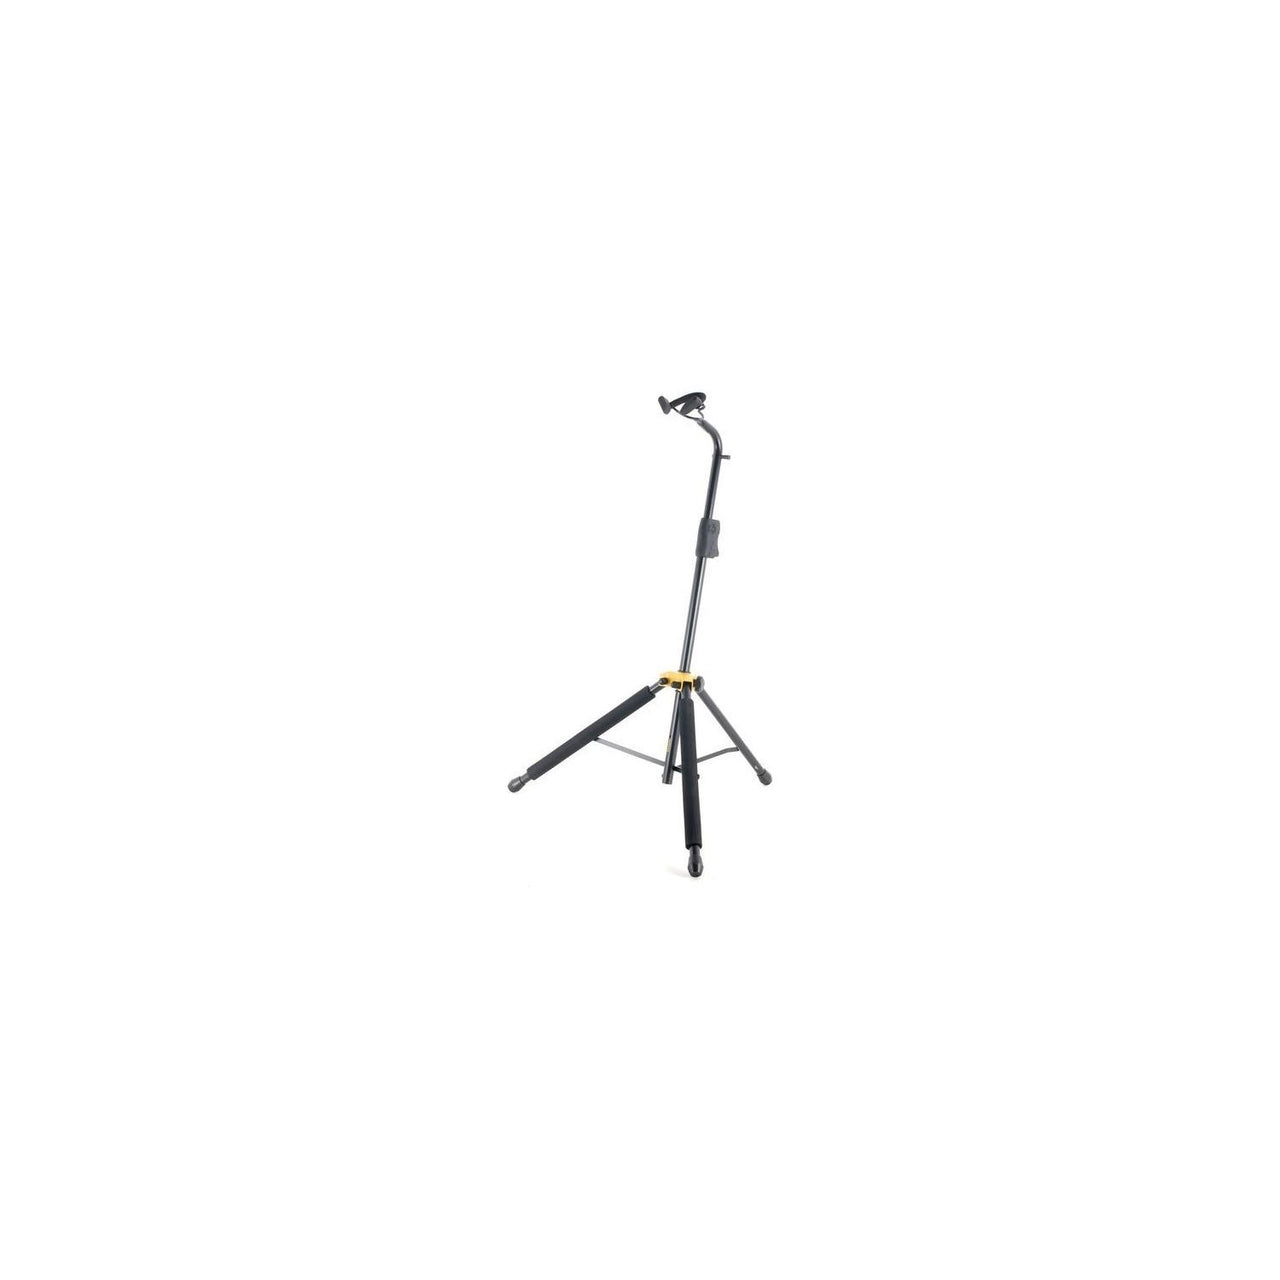 Stand Hercules Para Violonchelo Ds-580b